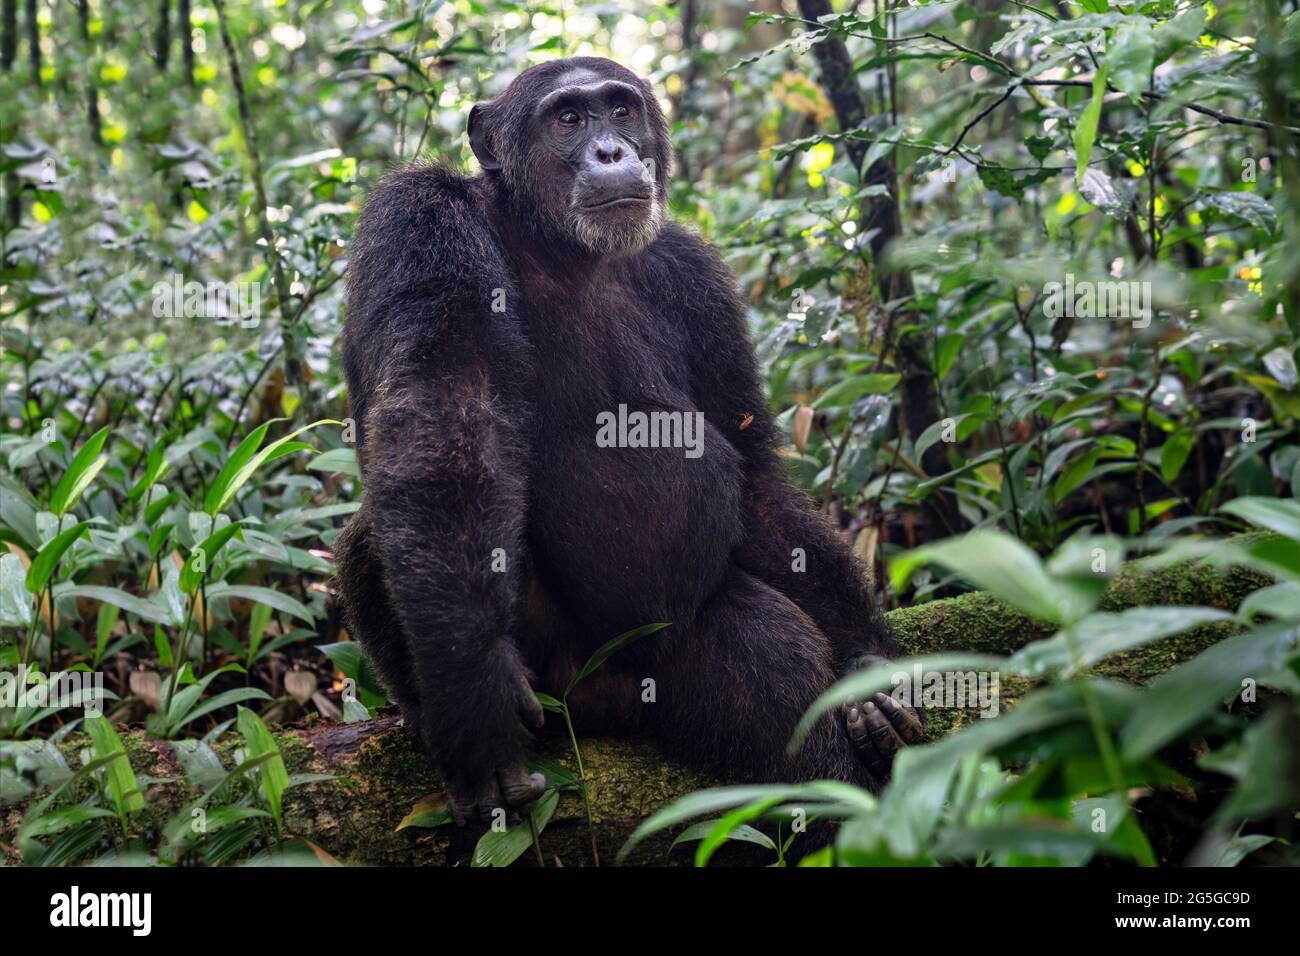 Close up image of chimpanzee within the forest of the Kibale National Park, Uganda, Africa Stock Photo